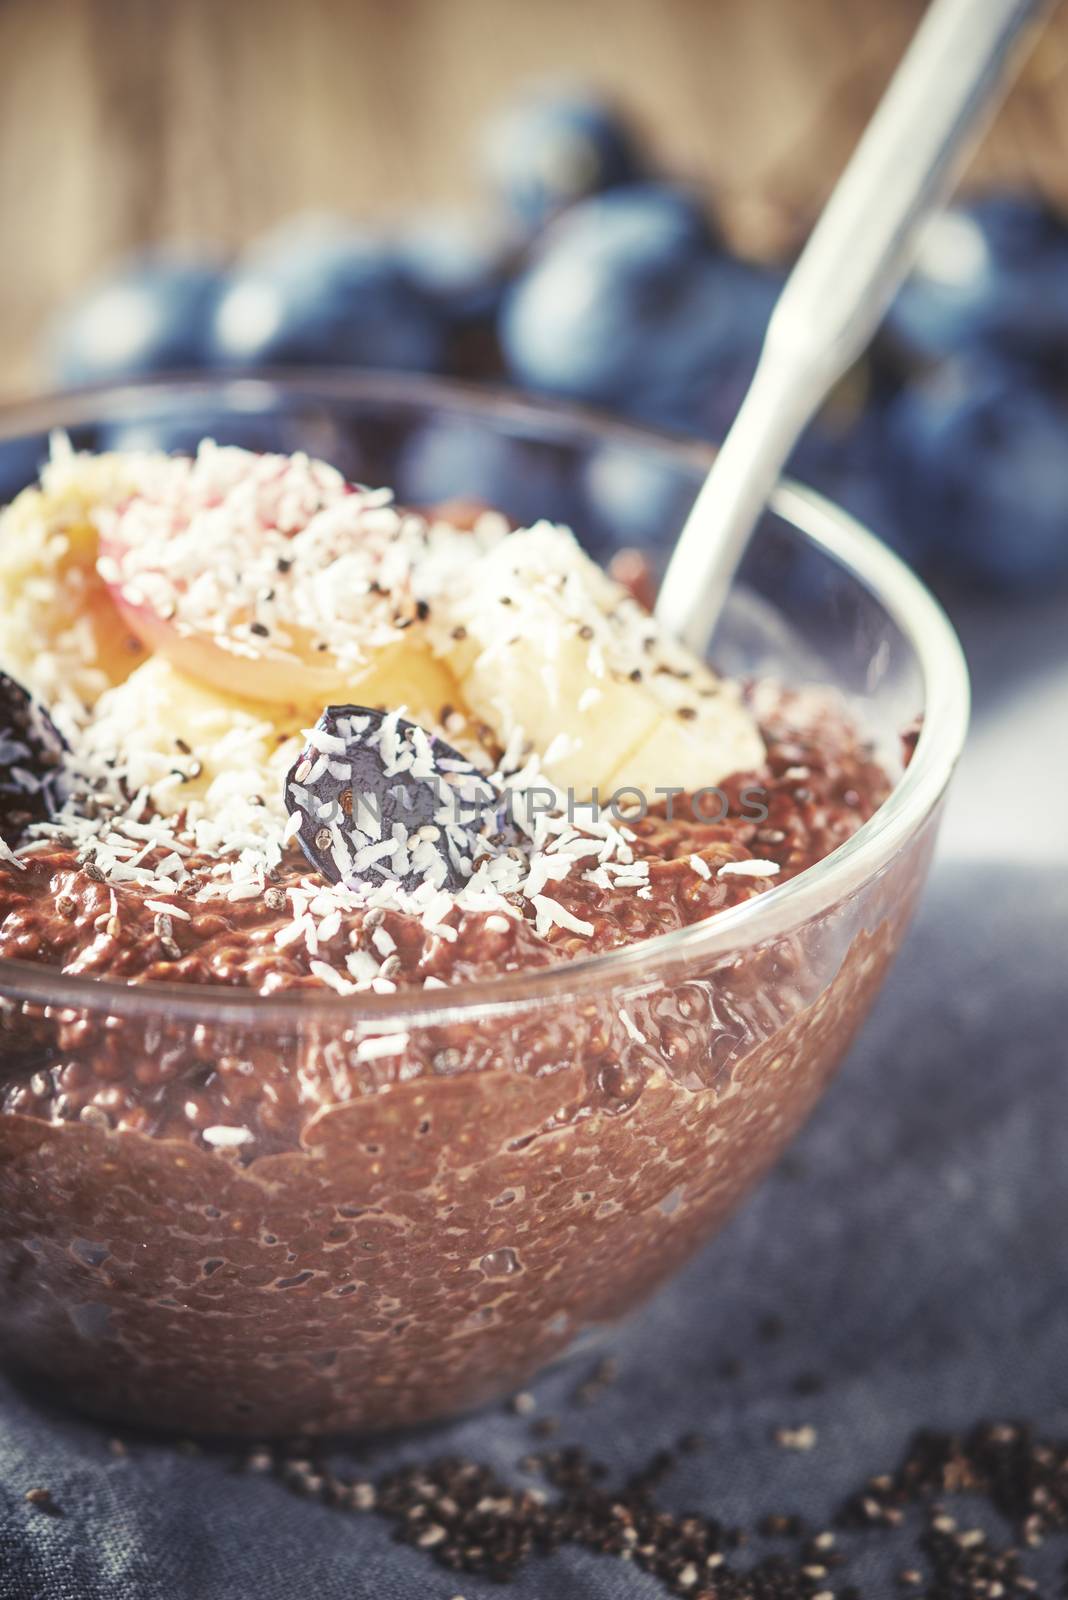 Chocolate chia pudding with fruits in the glass bowl by Deniskarpenkov